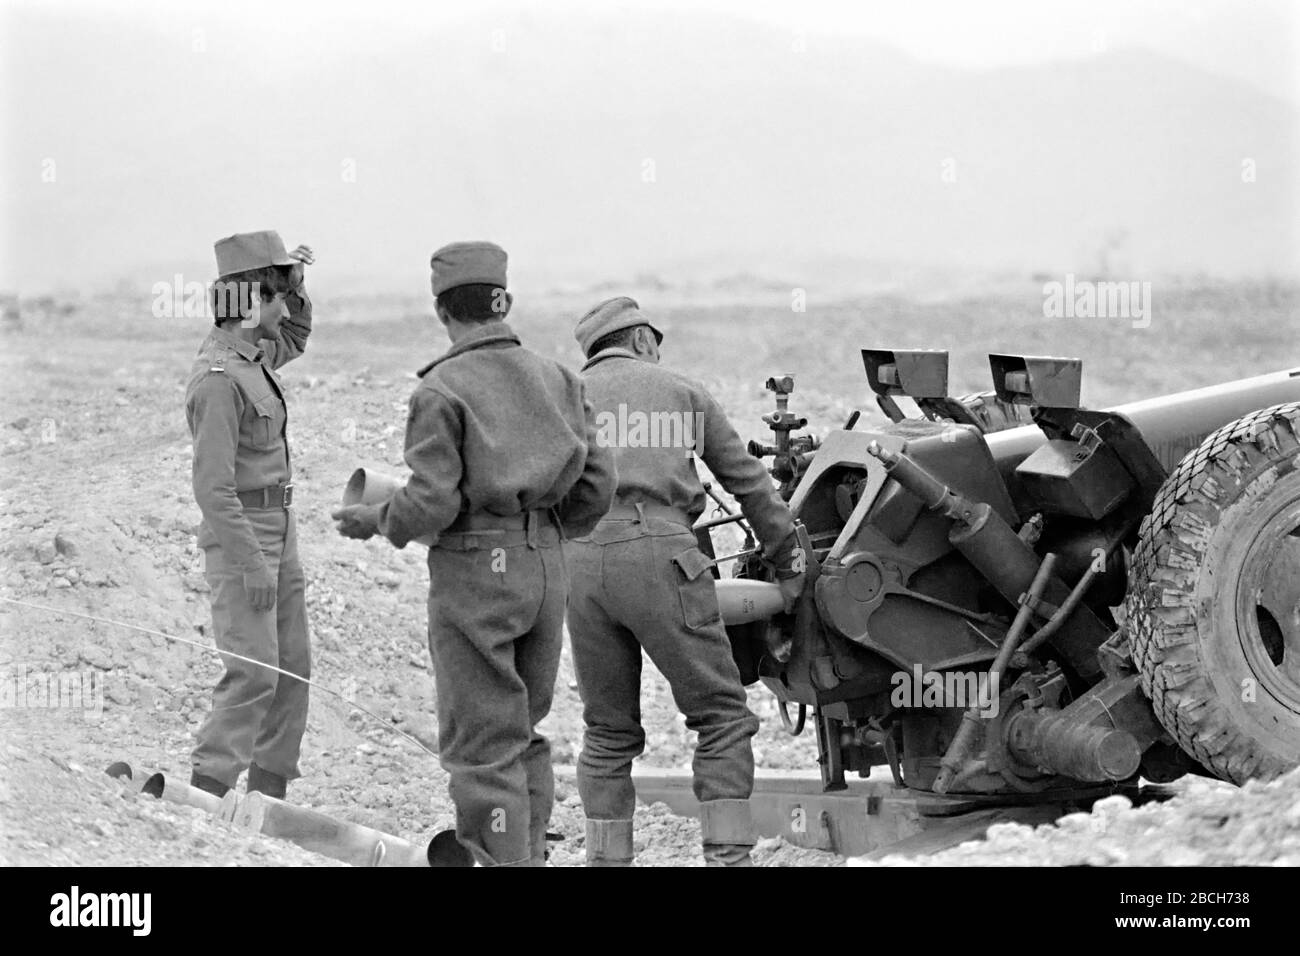 Afghan soldiers load artillery rounds into a Soviet-made 122mm cannon at the Pagaman forward operating post May 1, 1989 in Pagaman, Afghanistan. The base protects a main entry point into the capital Kabul and is less than a mile from the Afghan mujahideen fighters front lines. Stock Photo